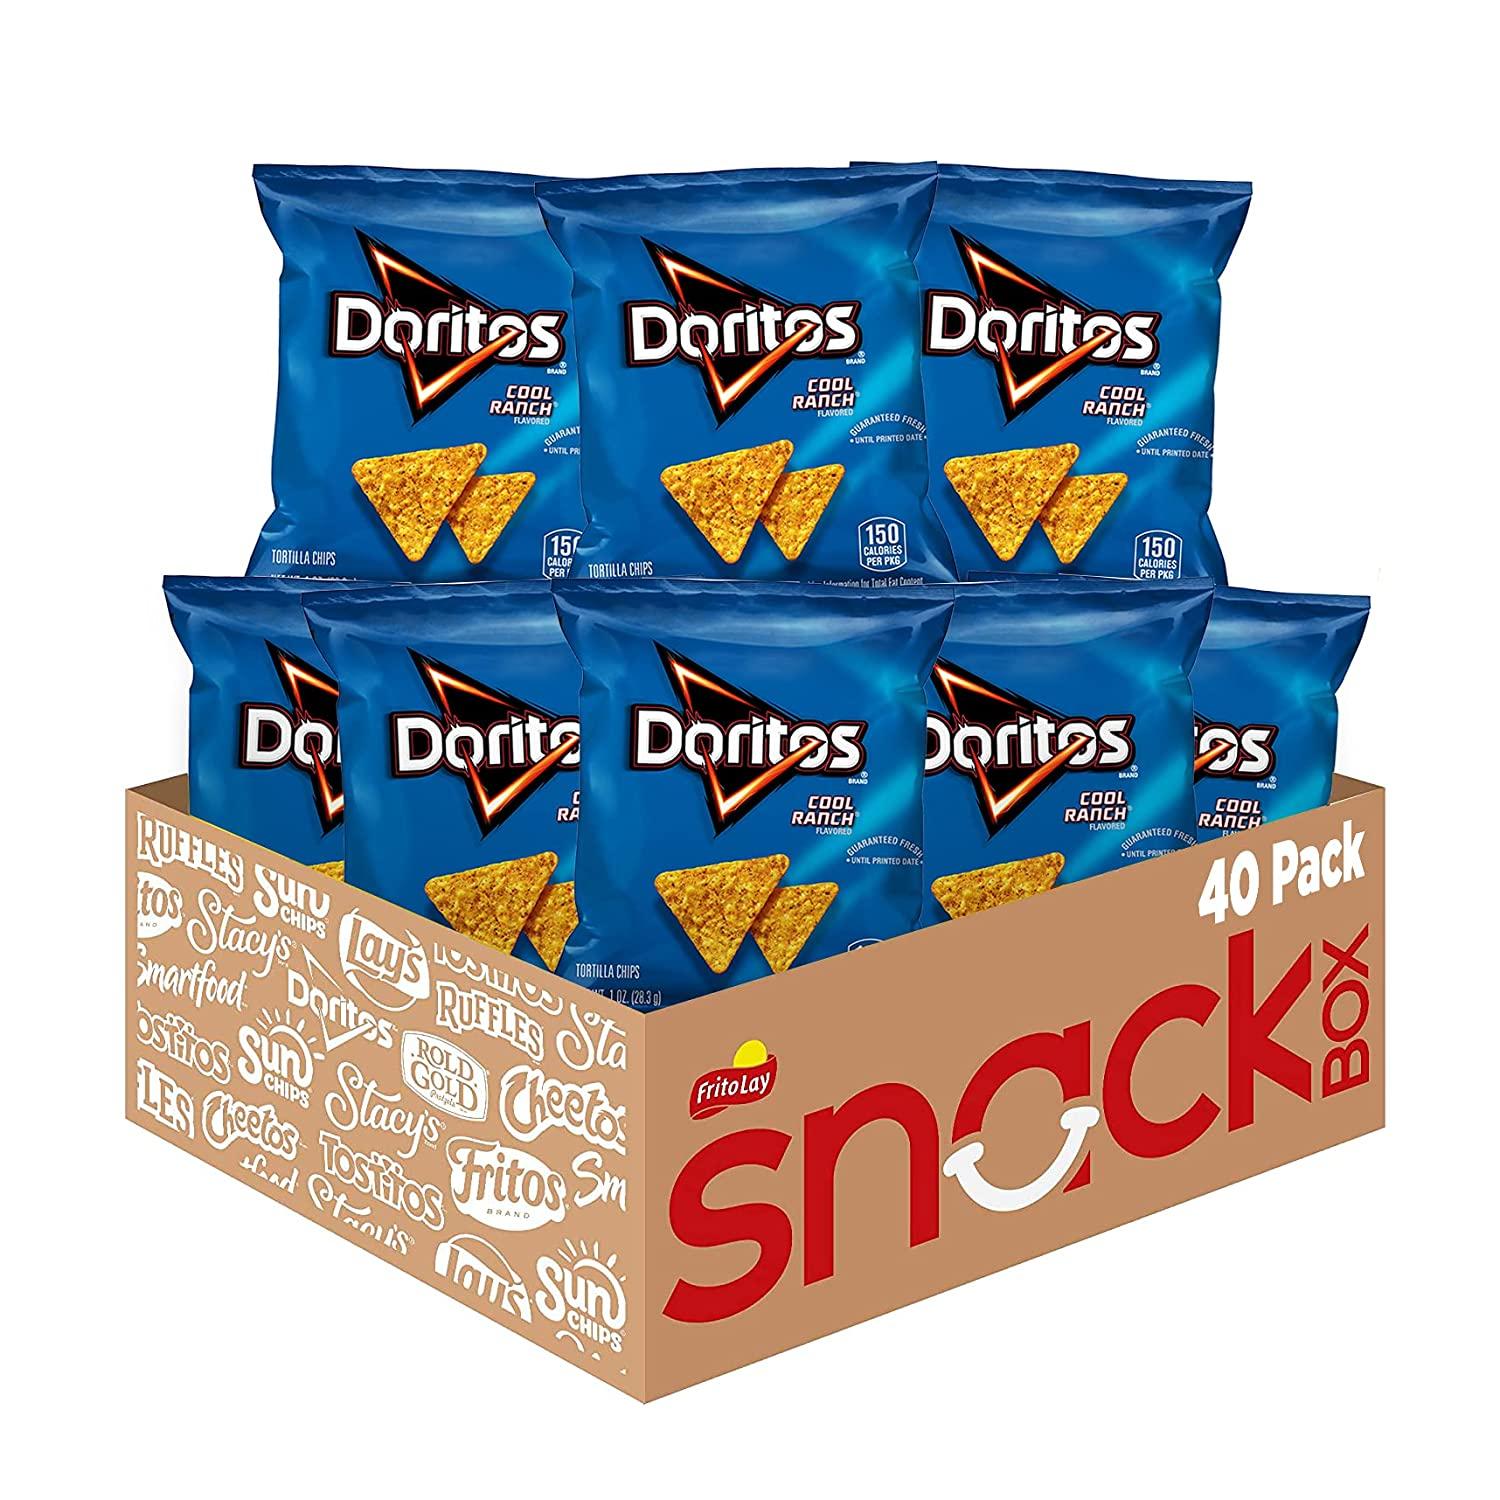 Doritos Cool Ranch Flavored Tortilla Chips 40 Pack for $13.98